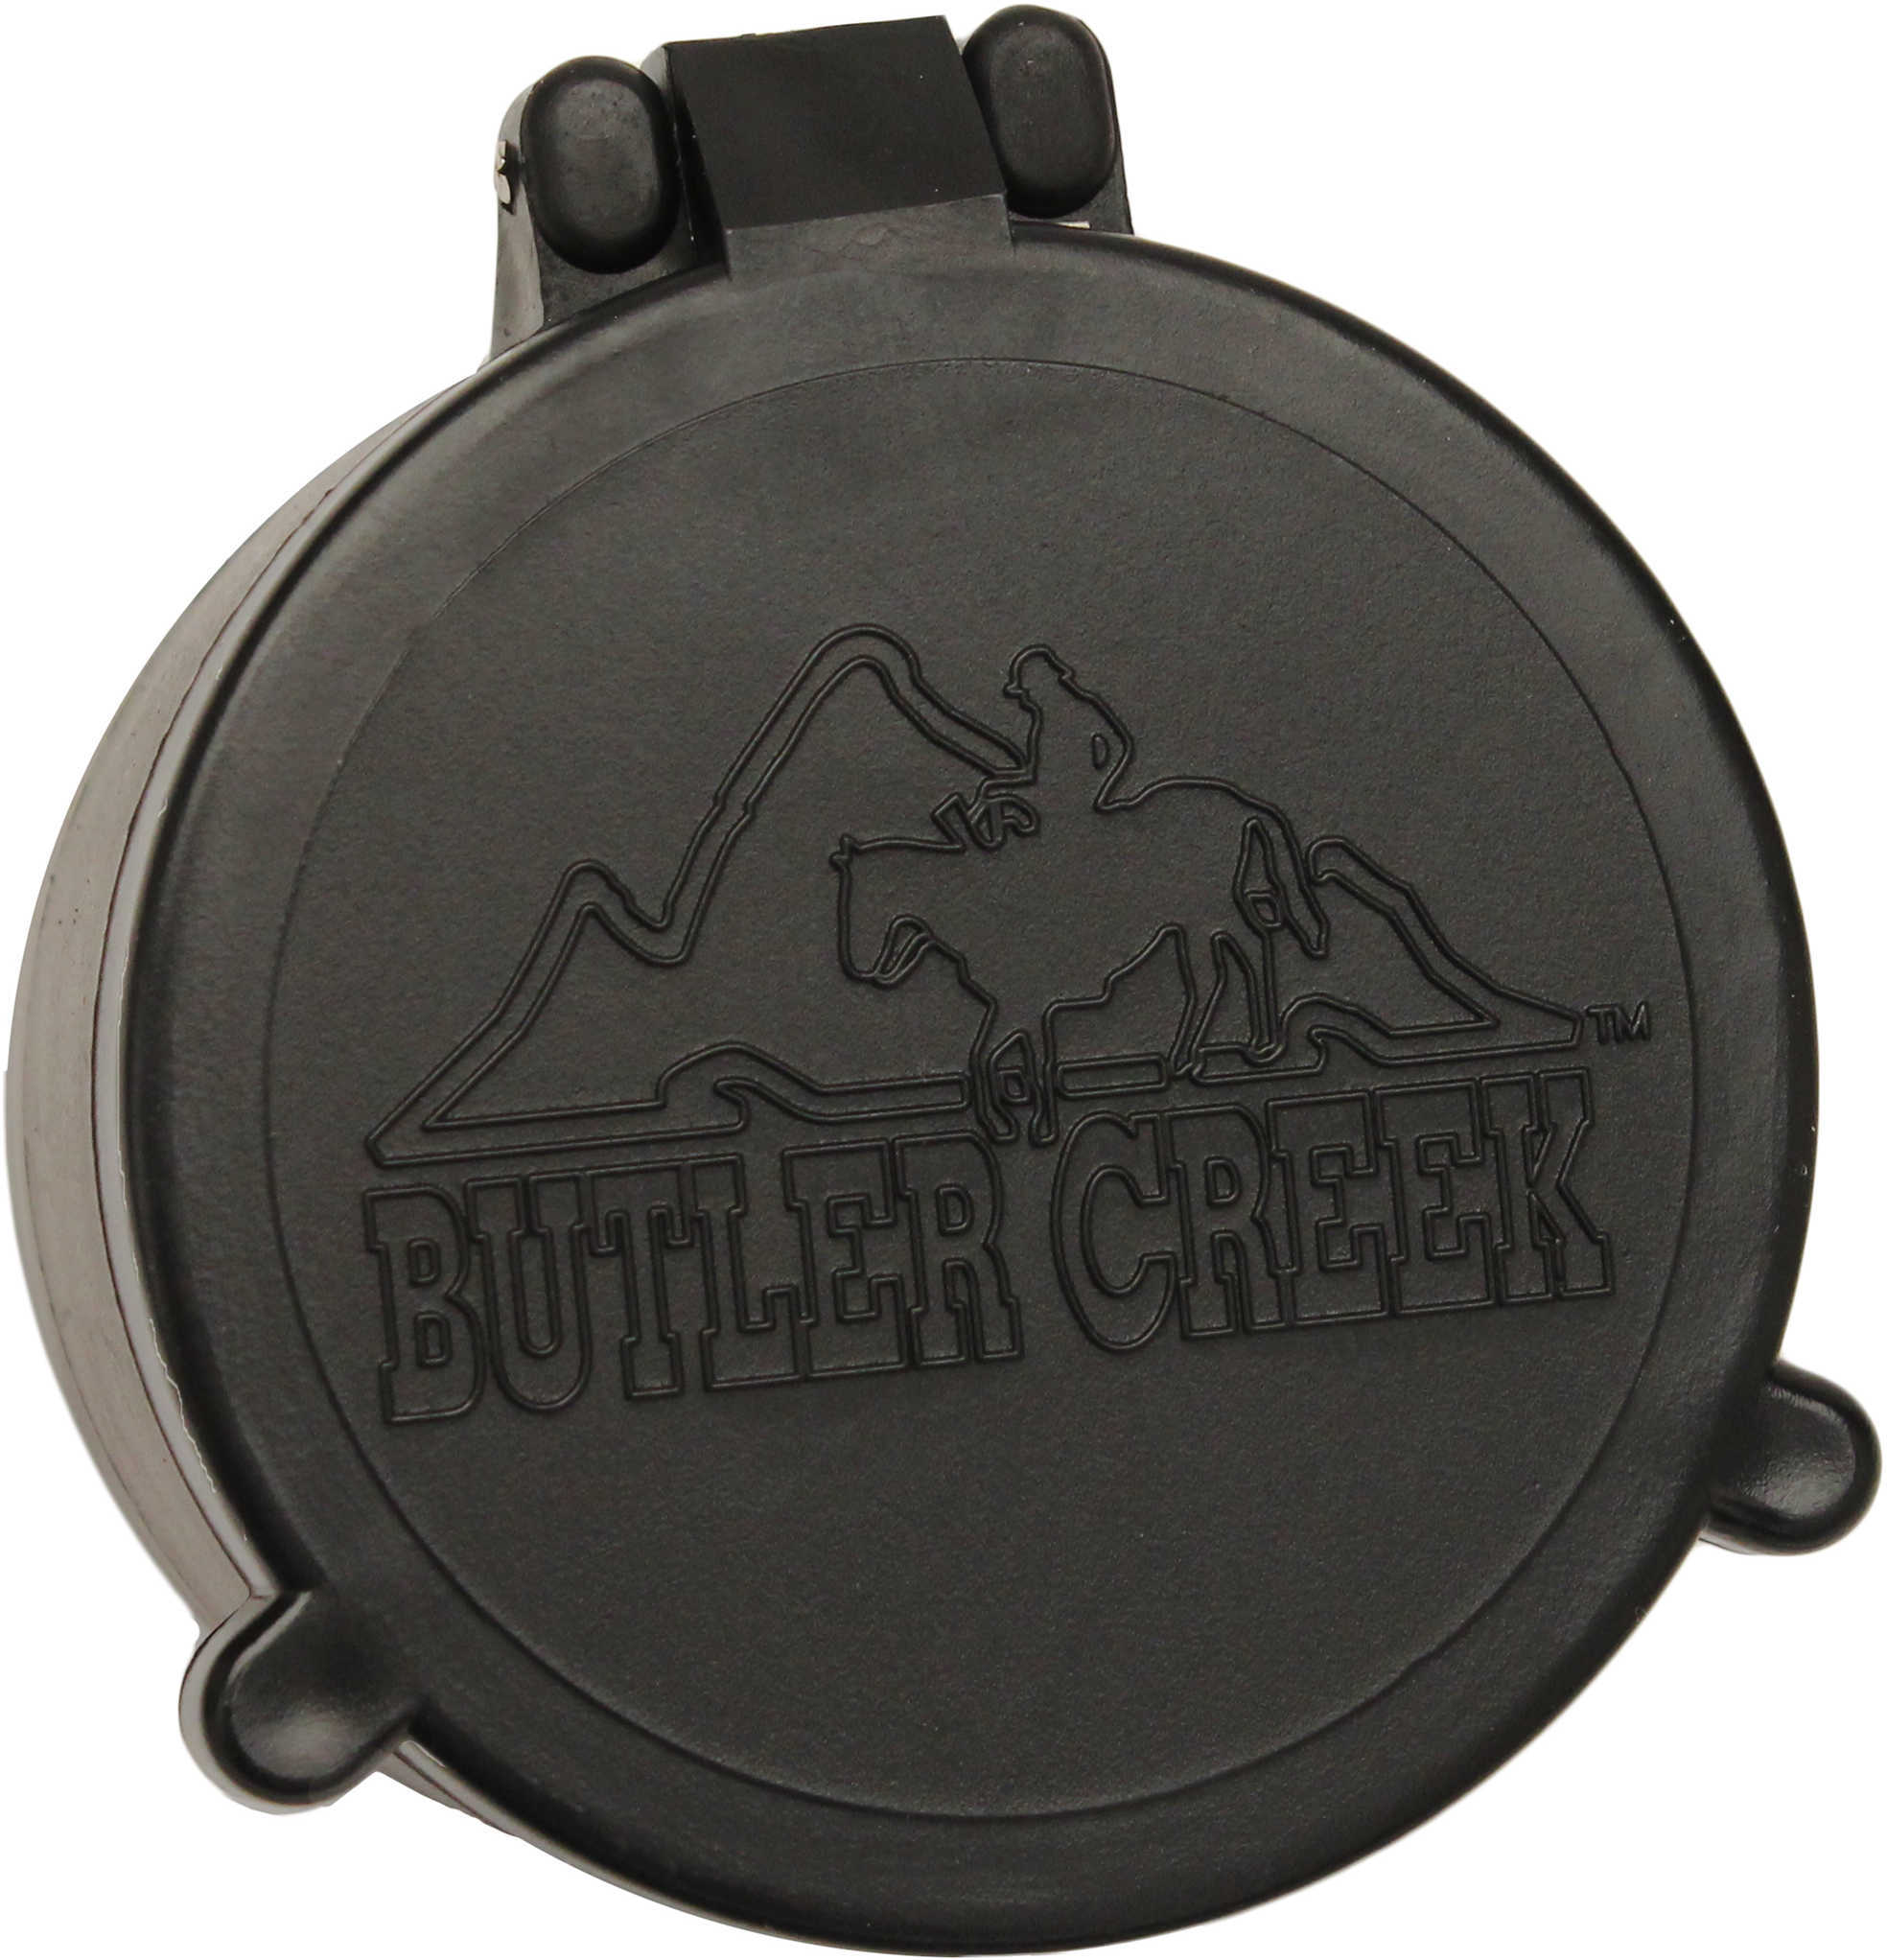 Butler Creek Flip-Open Scope Cover - 31 Objective 1.998" Diameter Quiet Opening lids at The Touch Of Your thum